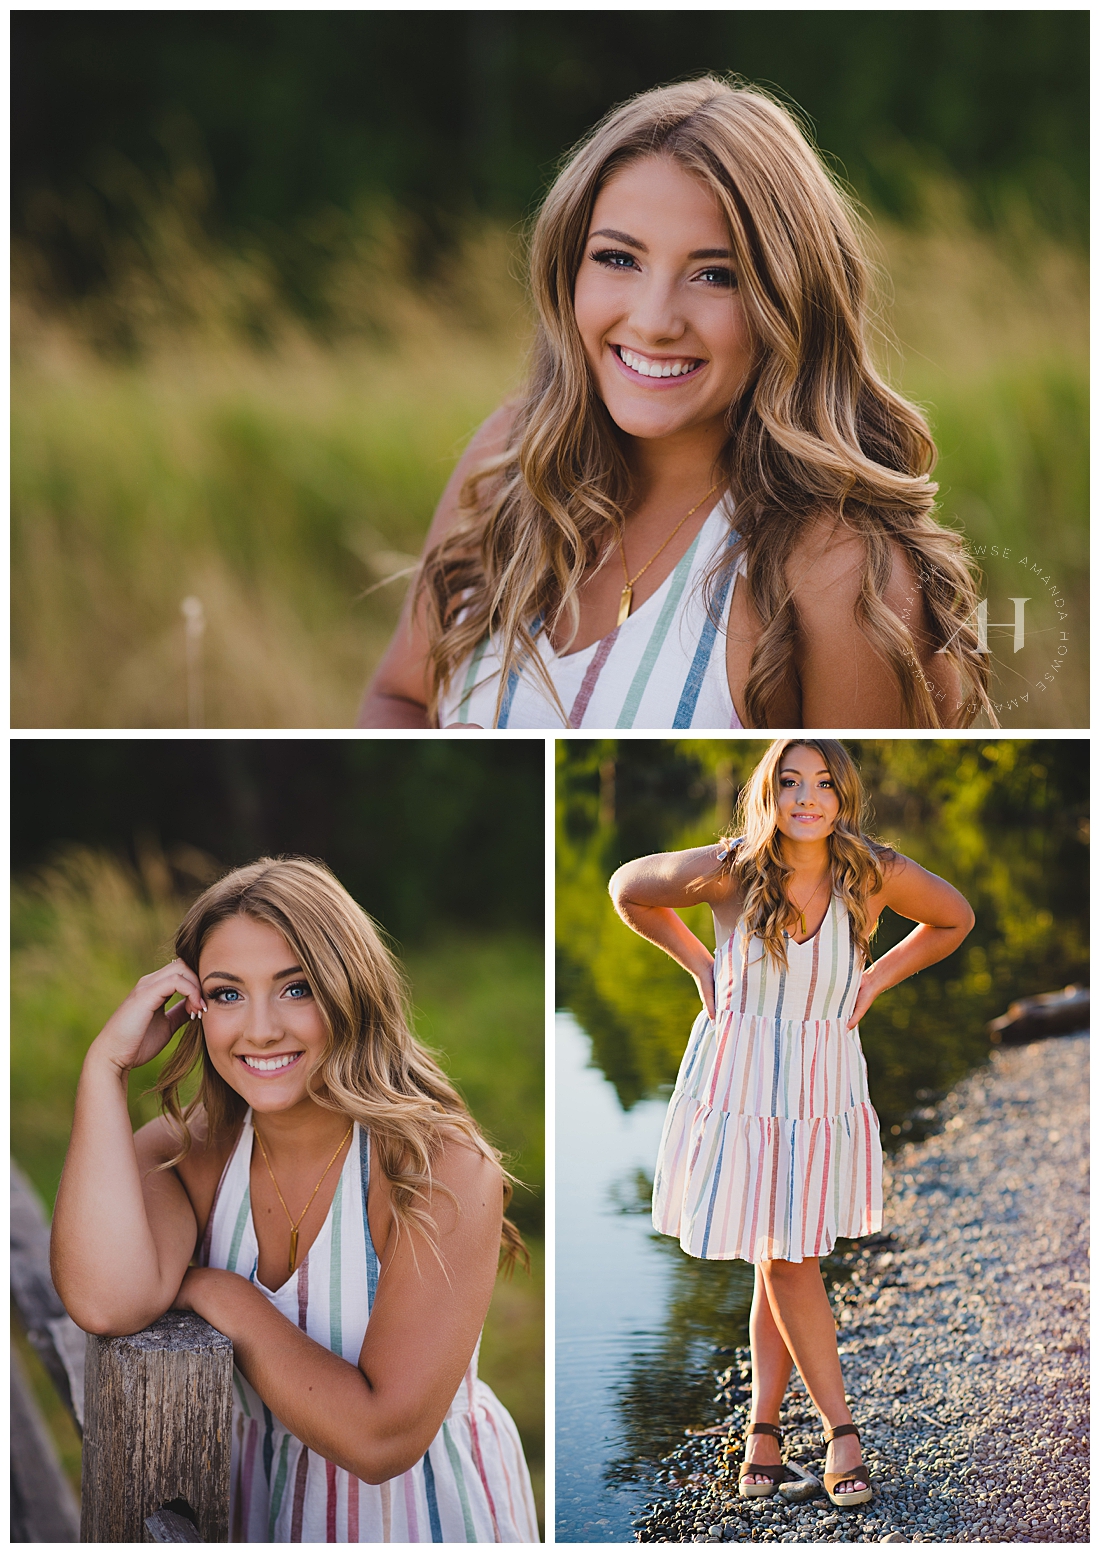 Cute Striped Dress for Senior Portraits | Head to the Blog to see this fun, versatile senior session in Washington filled with outfit inspiration and location ideas for seniors | Photographed by the Best Tacoma Senior Photographer Amanda Howse